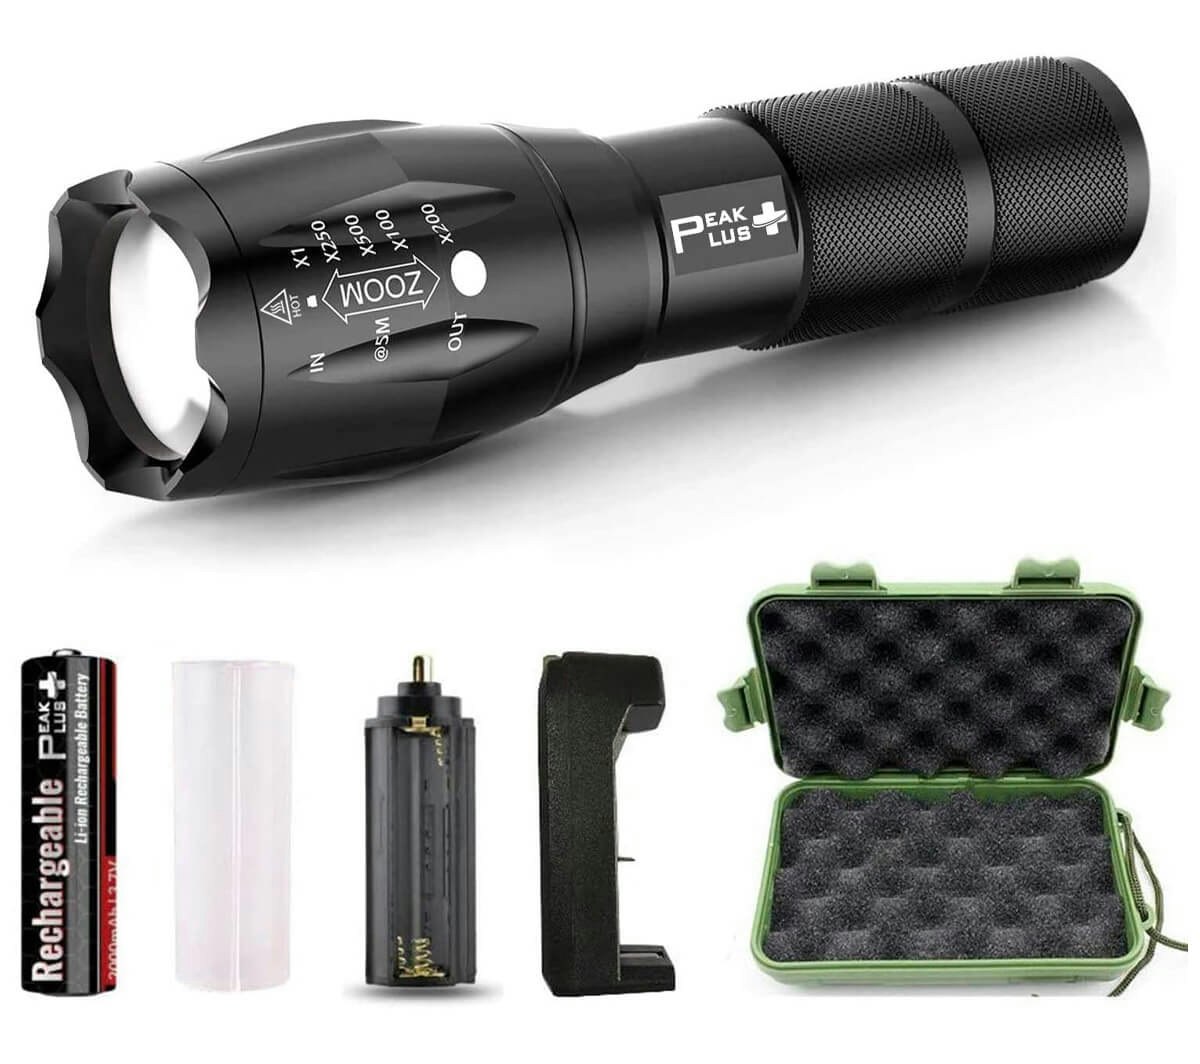 Best Flashlight for Delivery Drivers - PeakPlus LED Tactical Flashlight